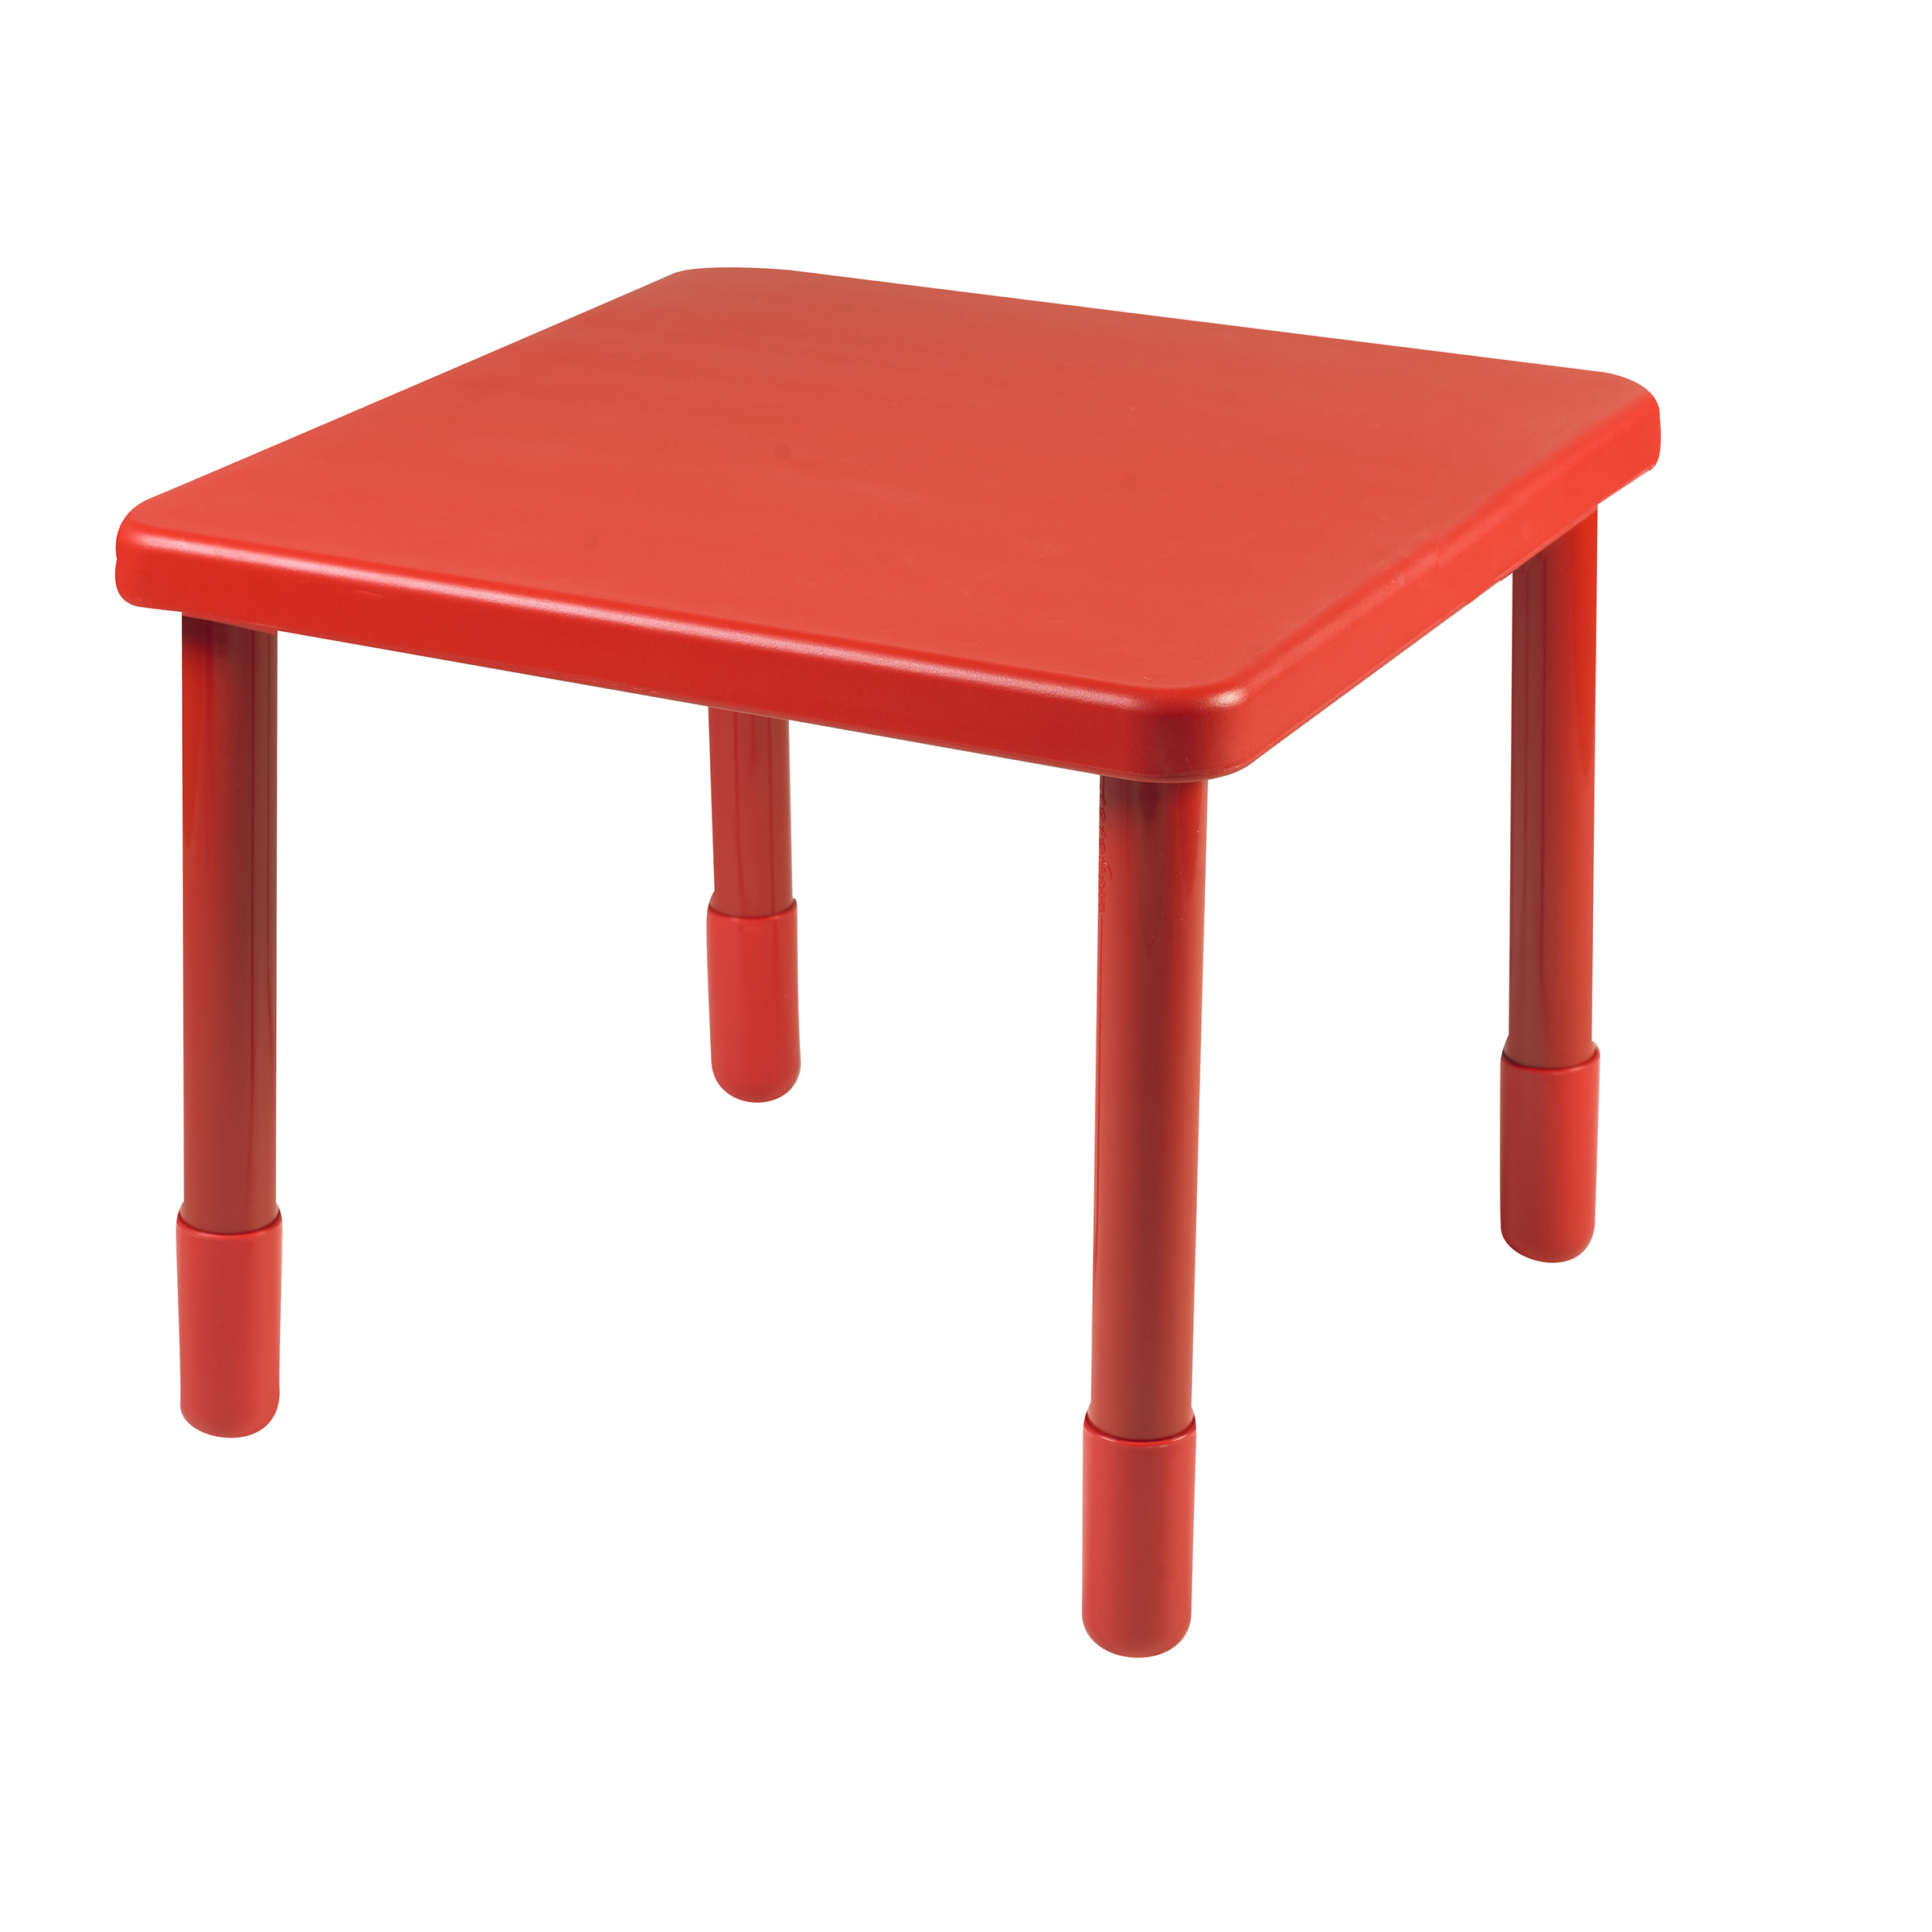 Value 71 cm  Square Table - Candy Apple Red with 56 cm  Legs